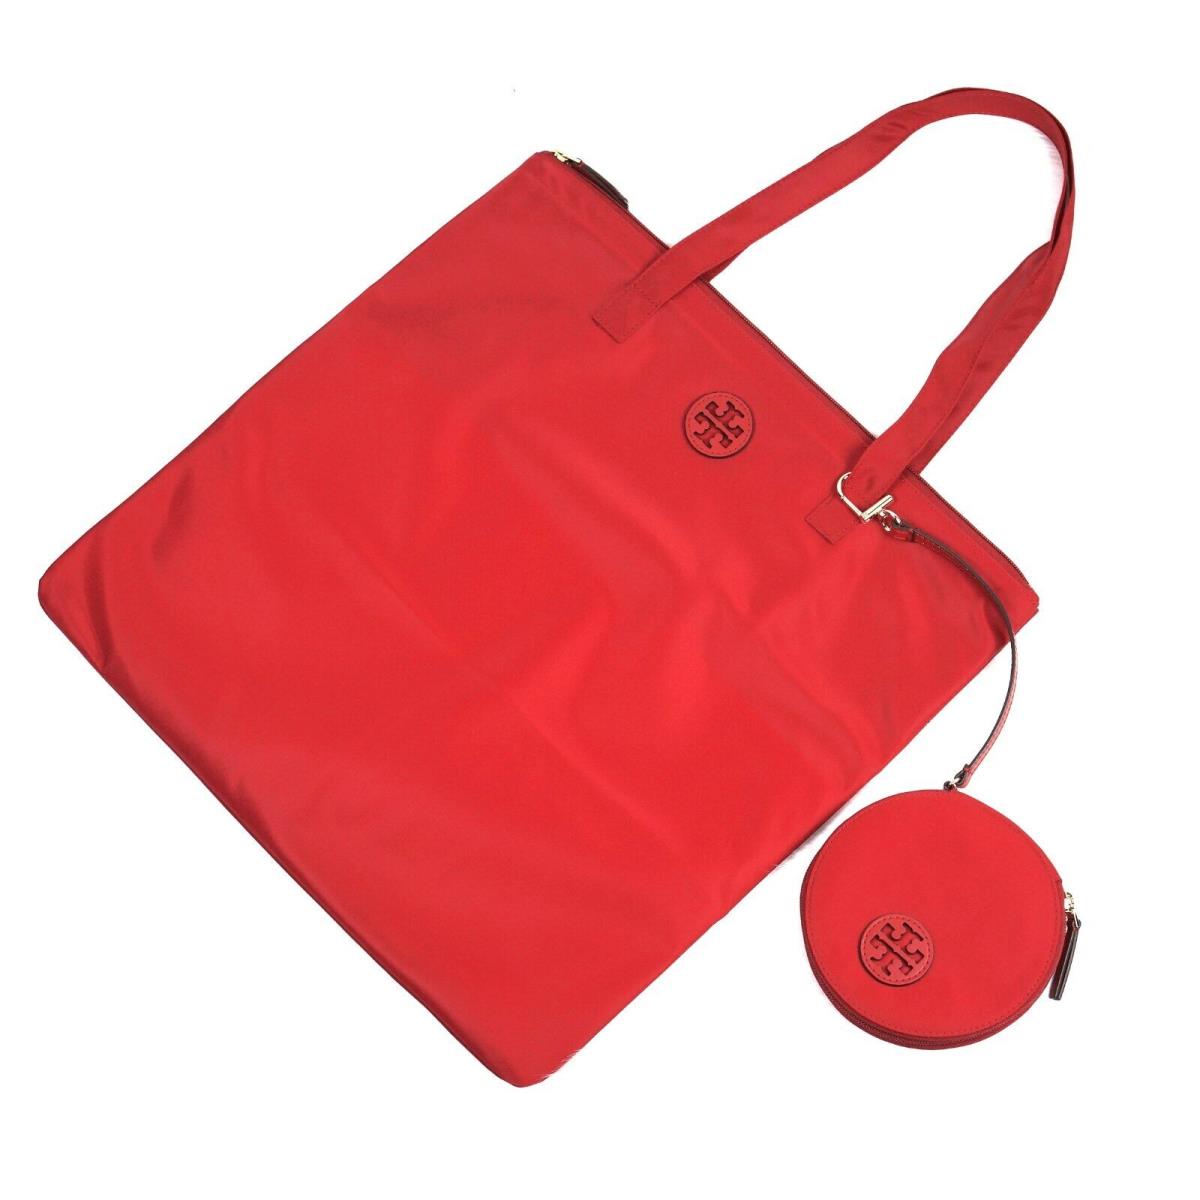 Latest Tory Burch Brilliant Red Nylon Packable Tote 17 x16.25 Travel Bag 78553